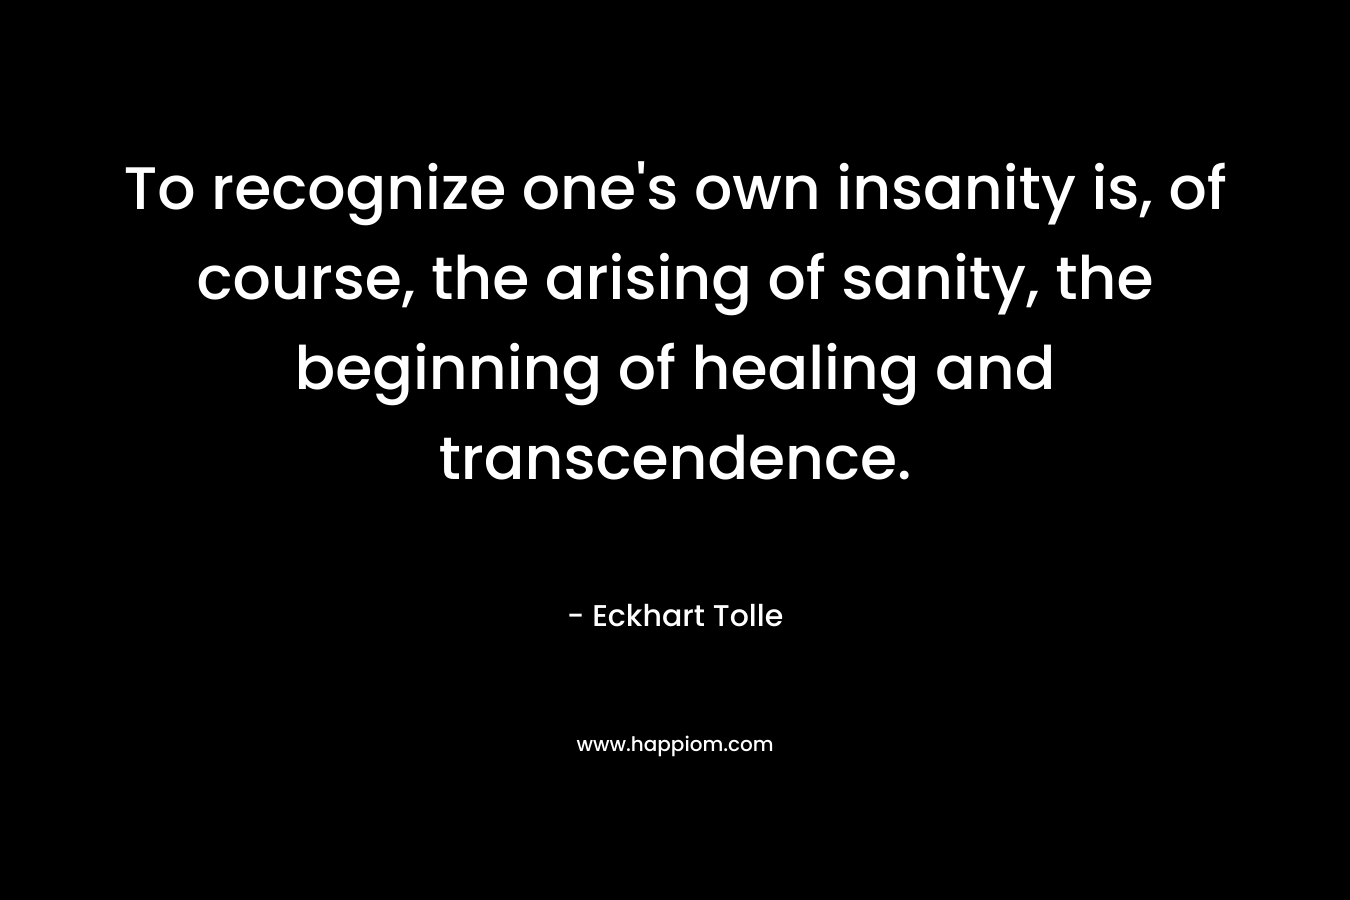 To recognize one’s own insanity is, of course, the arising of sanity, the beginning of healing and transcendence. – Eckhart Tolle